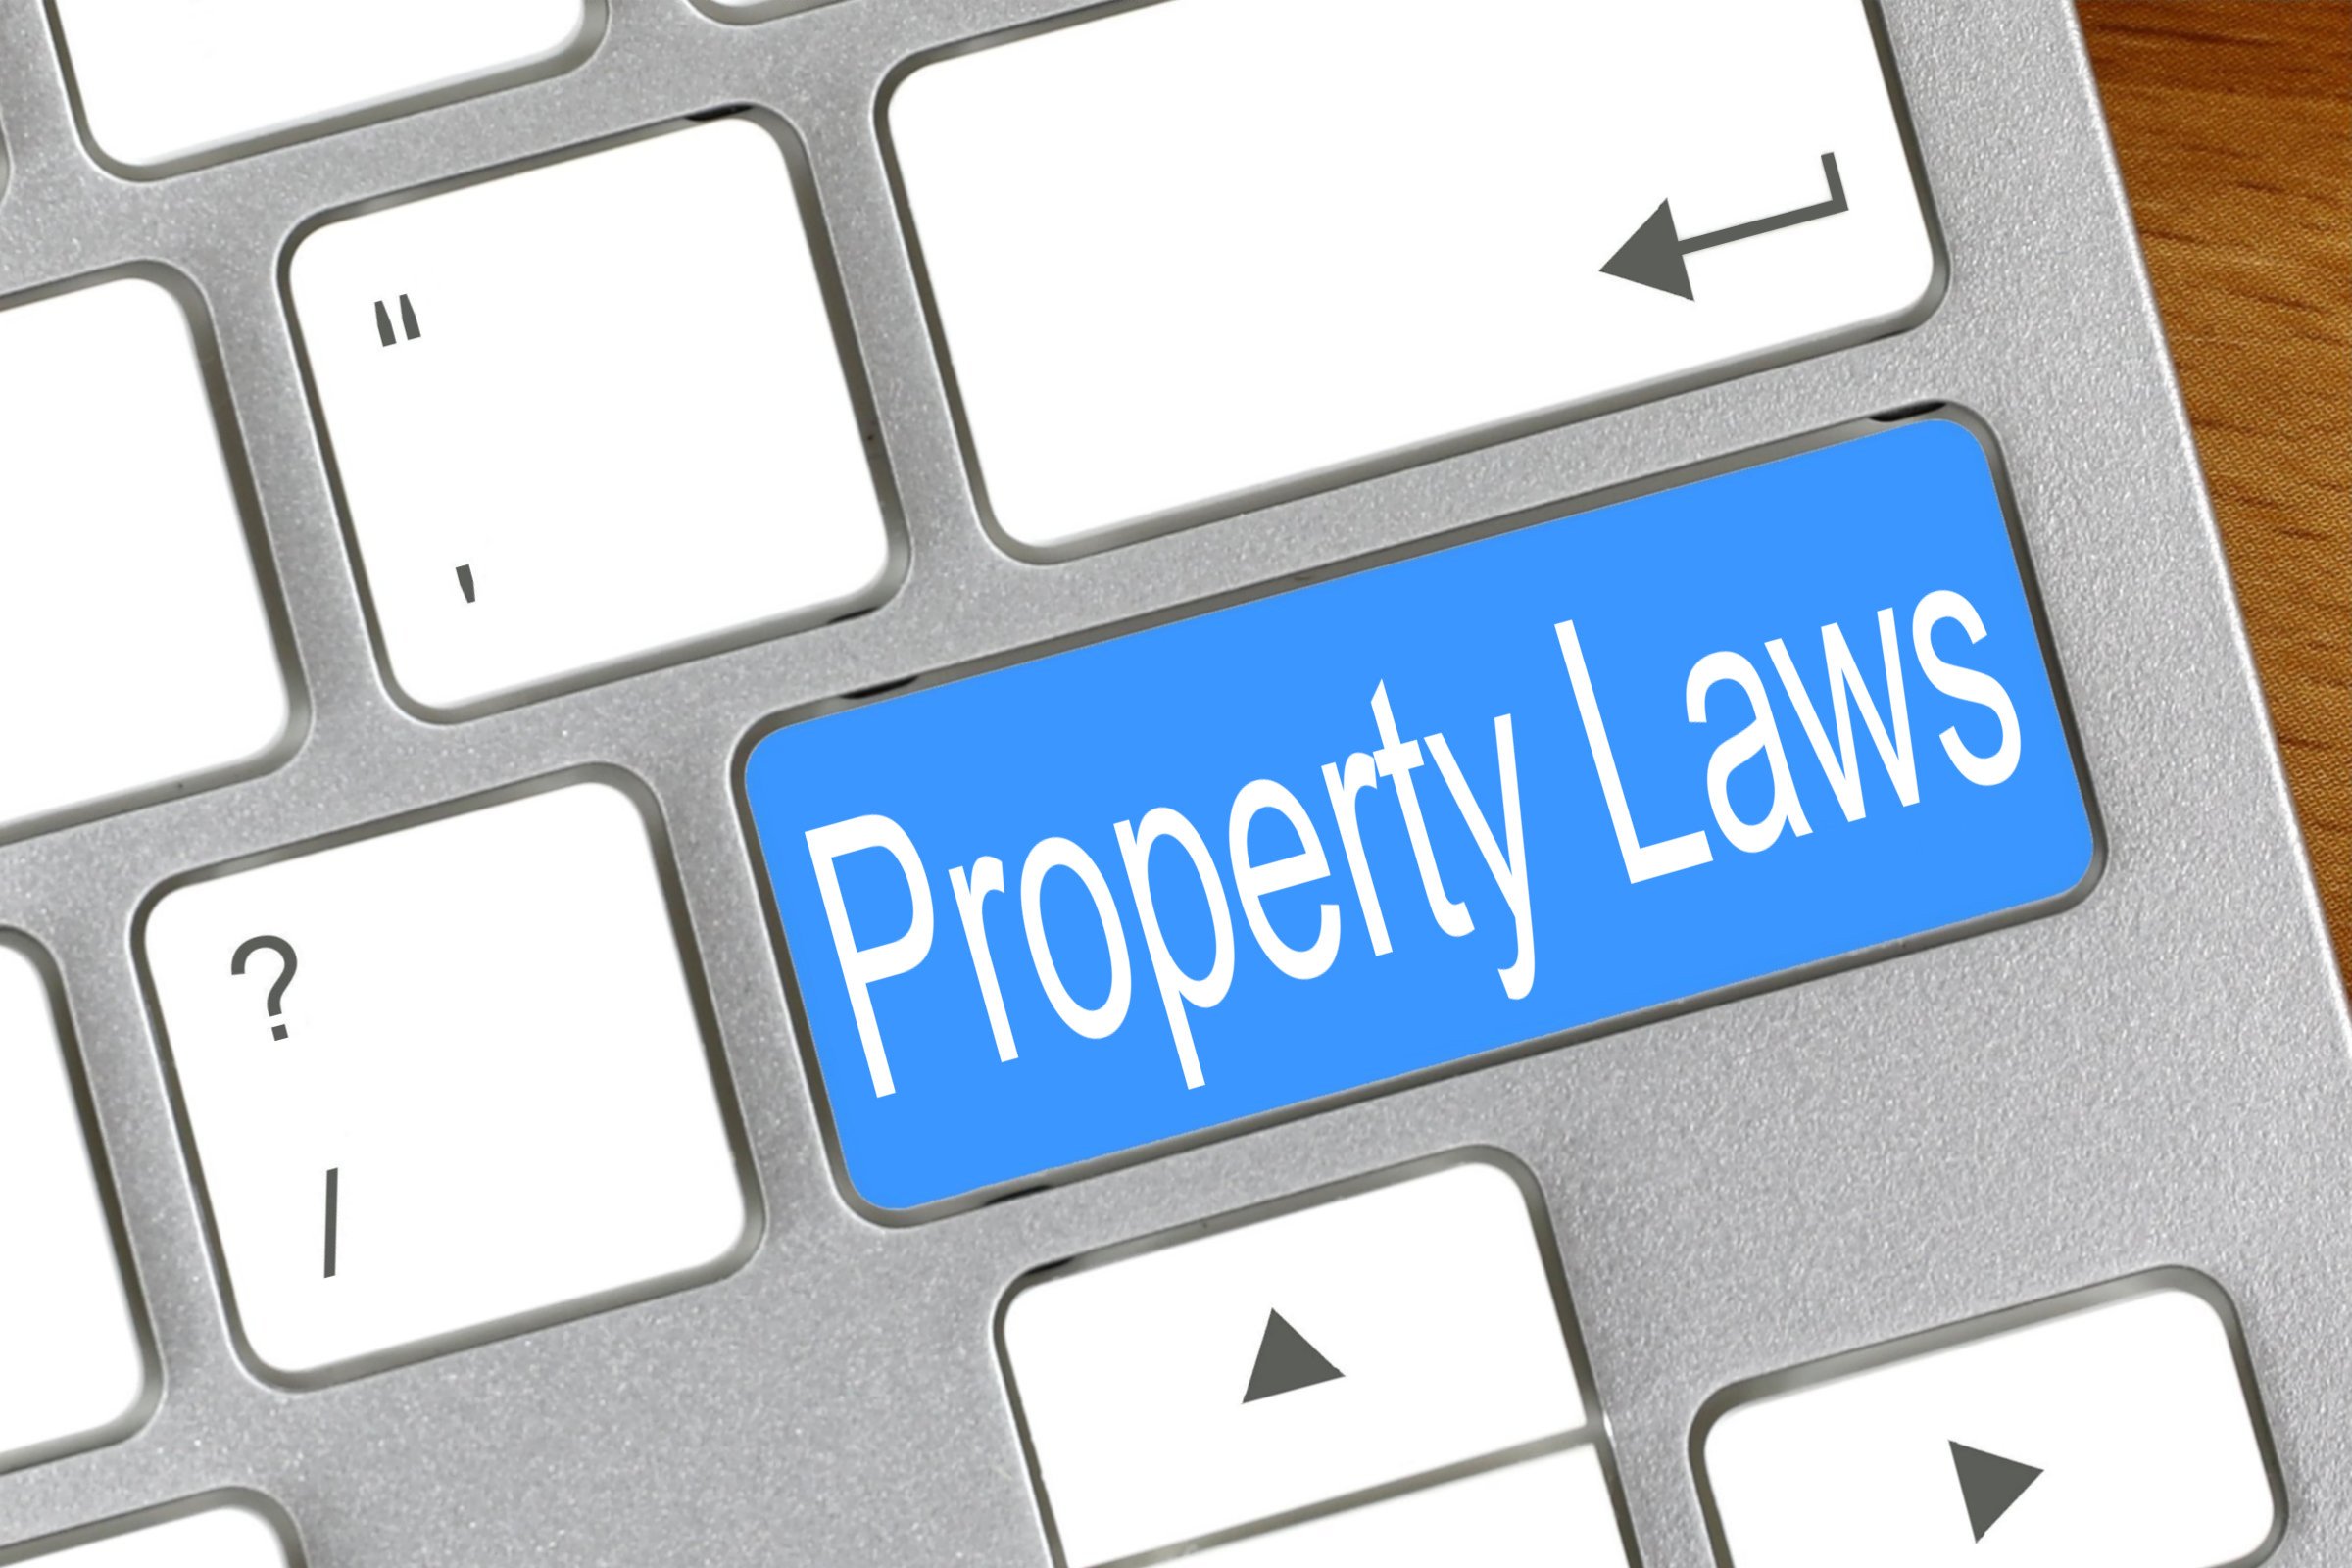 property laws